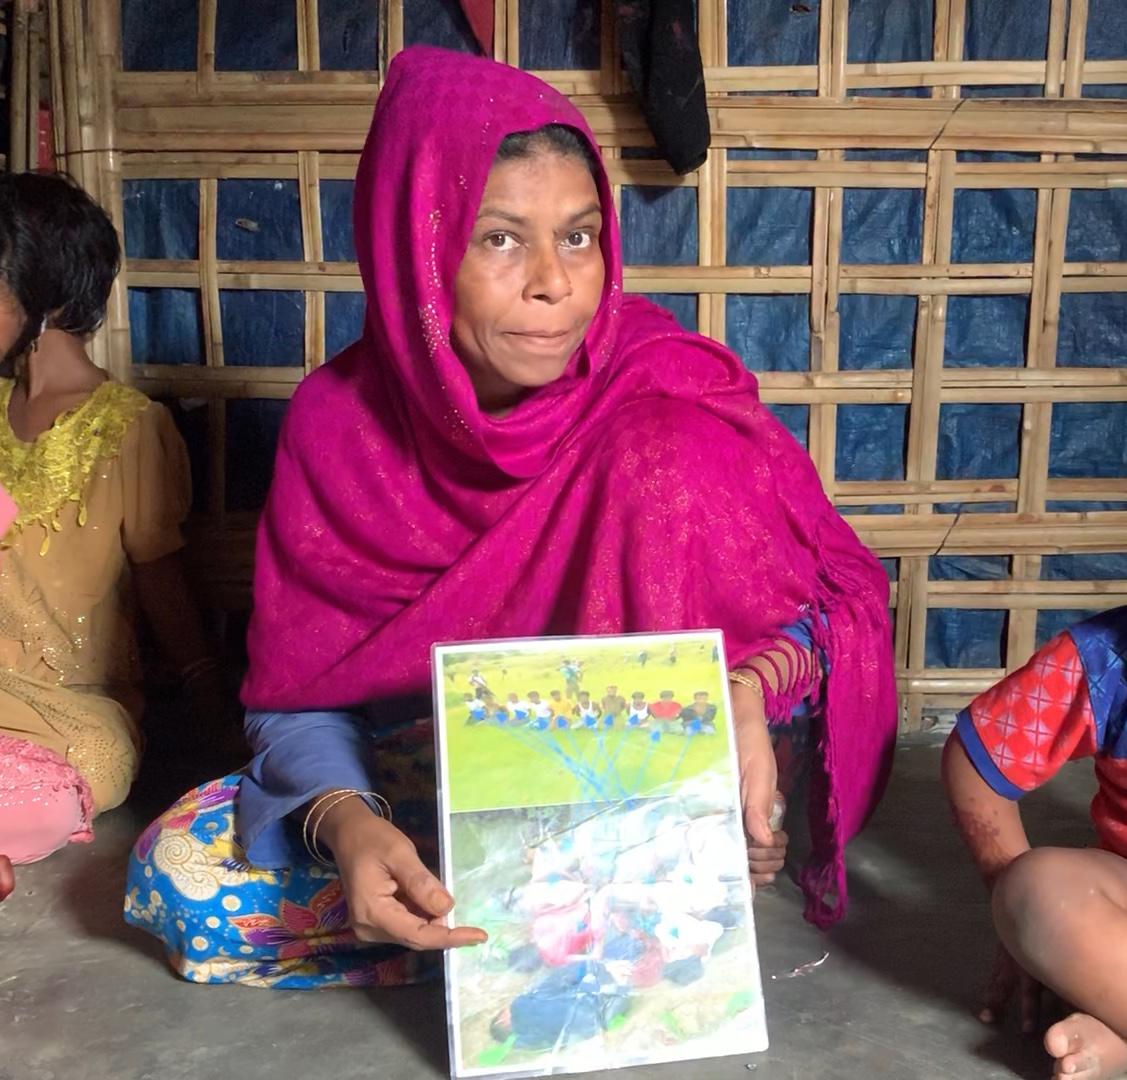 Rahama Khatun holds up photos of her husband who was massacred in Myanmar’s Inn Din village on September 2, 2017, in Cox’s Bazar refugee camp, Bangladesh, August 14, 2019.